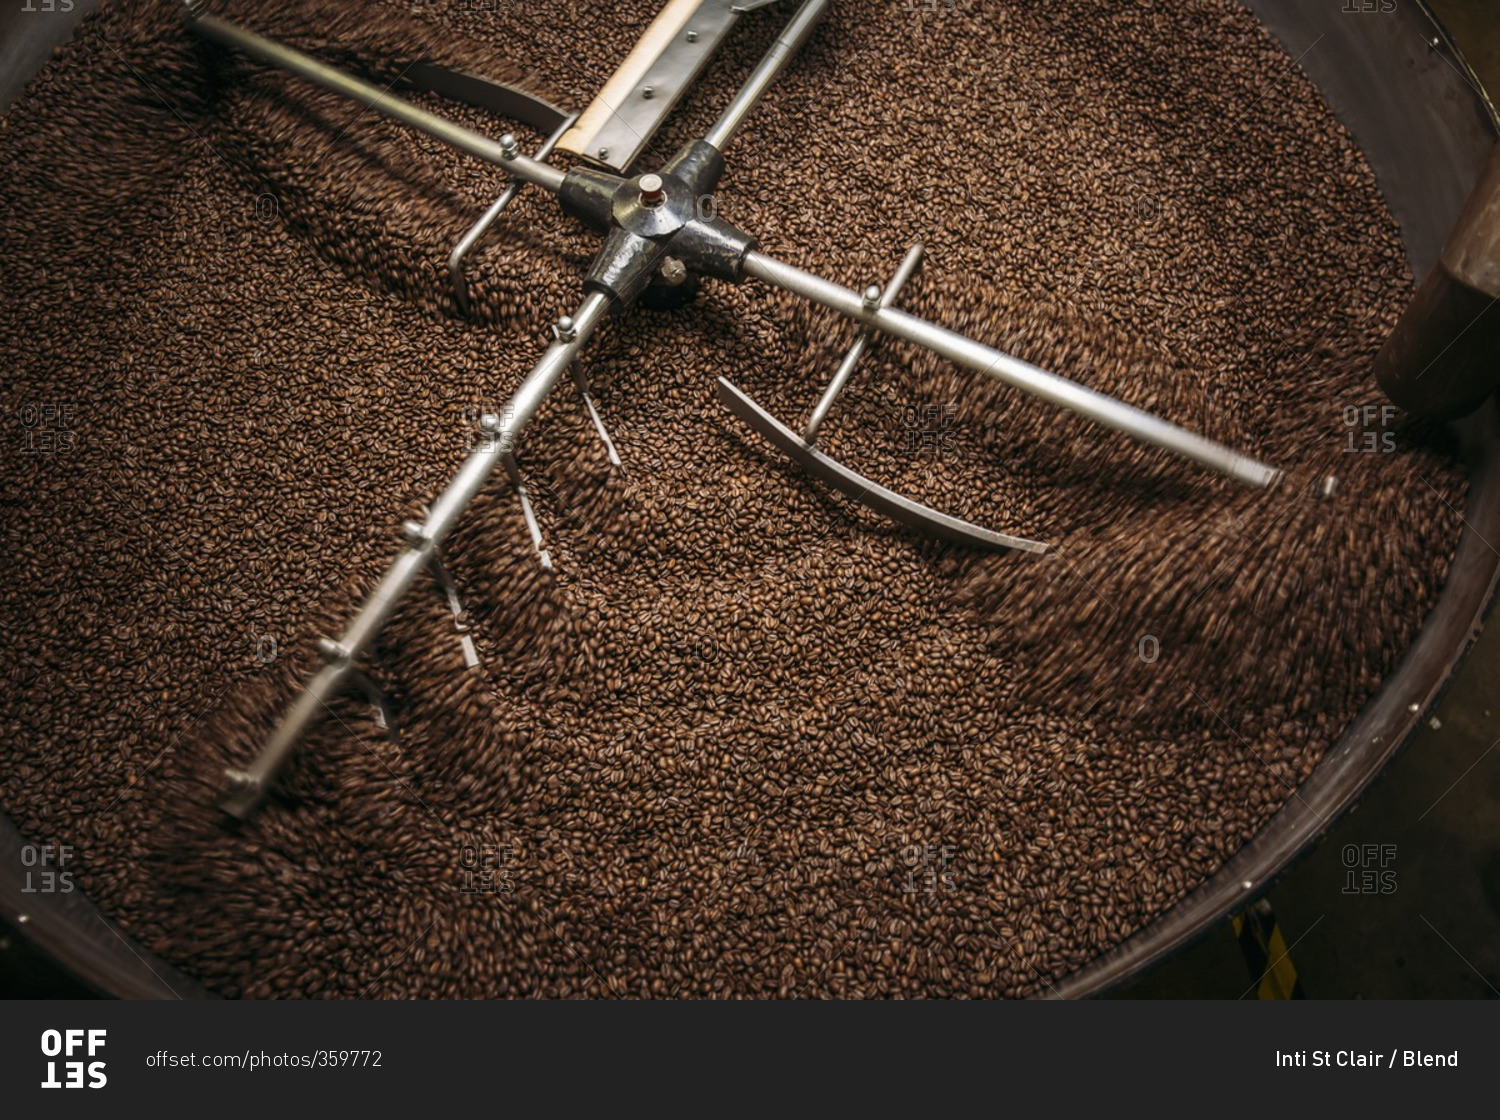 High angle view of equipment and beans in coffee roaster